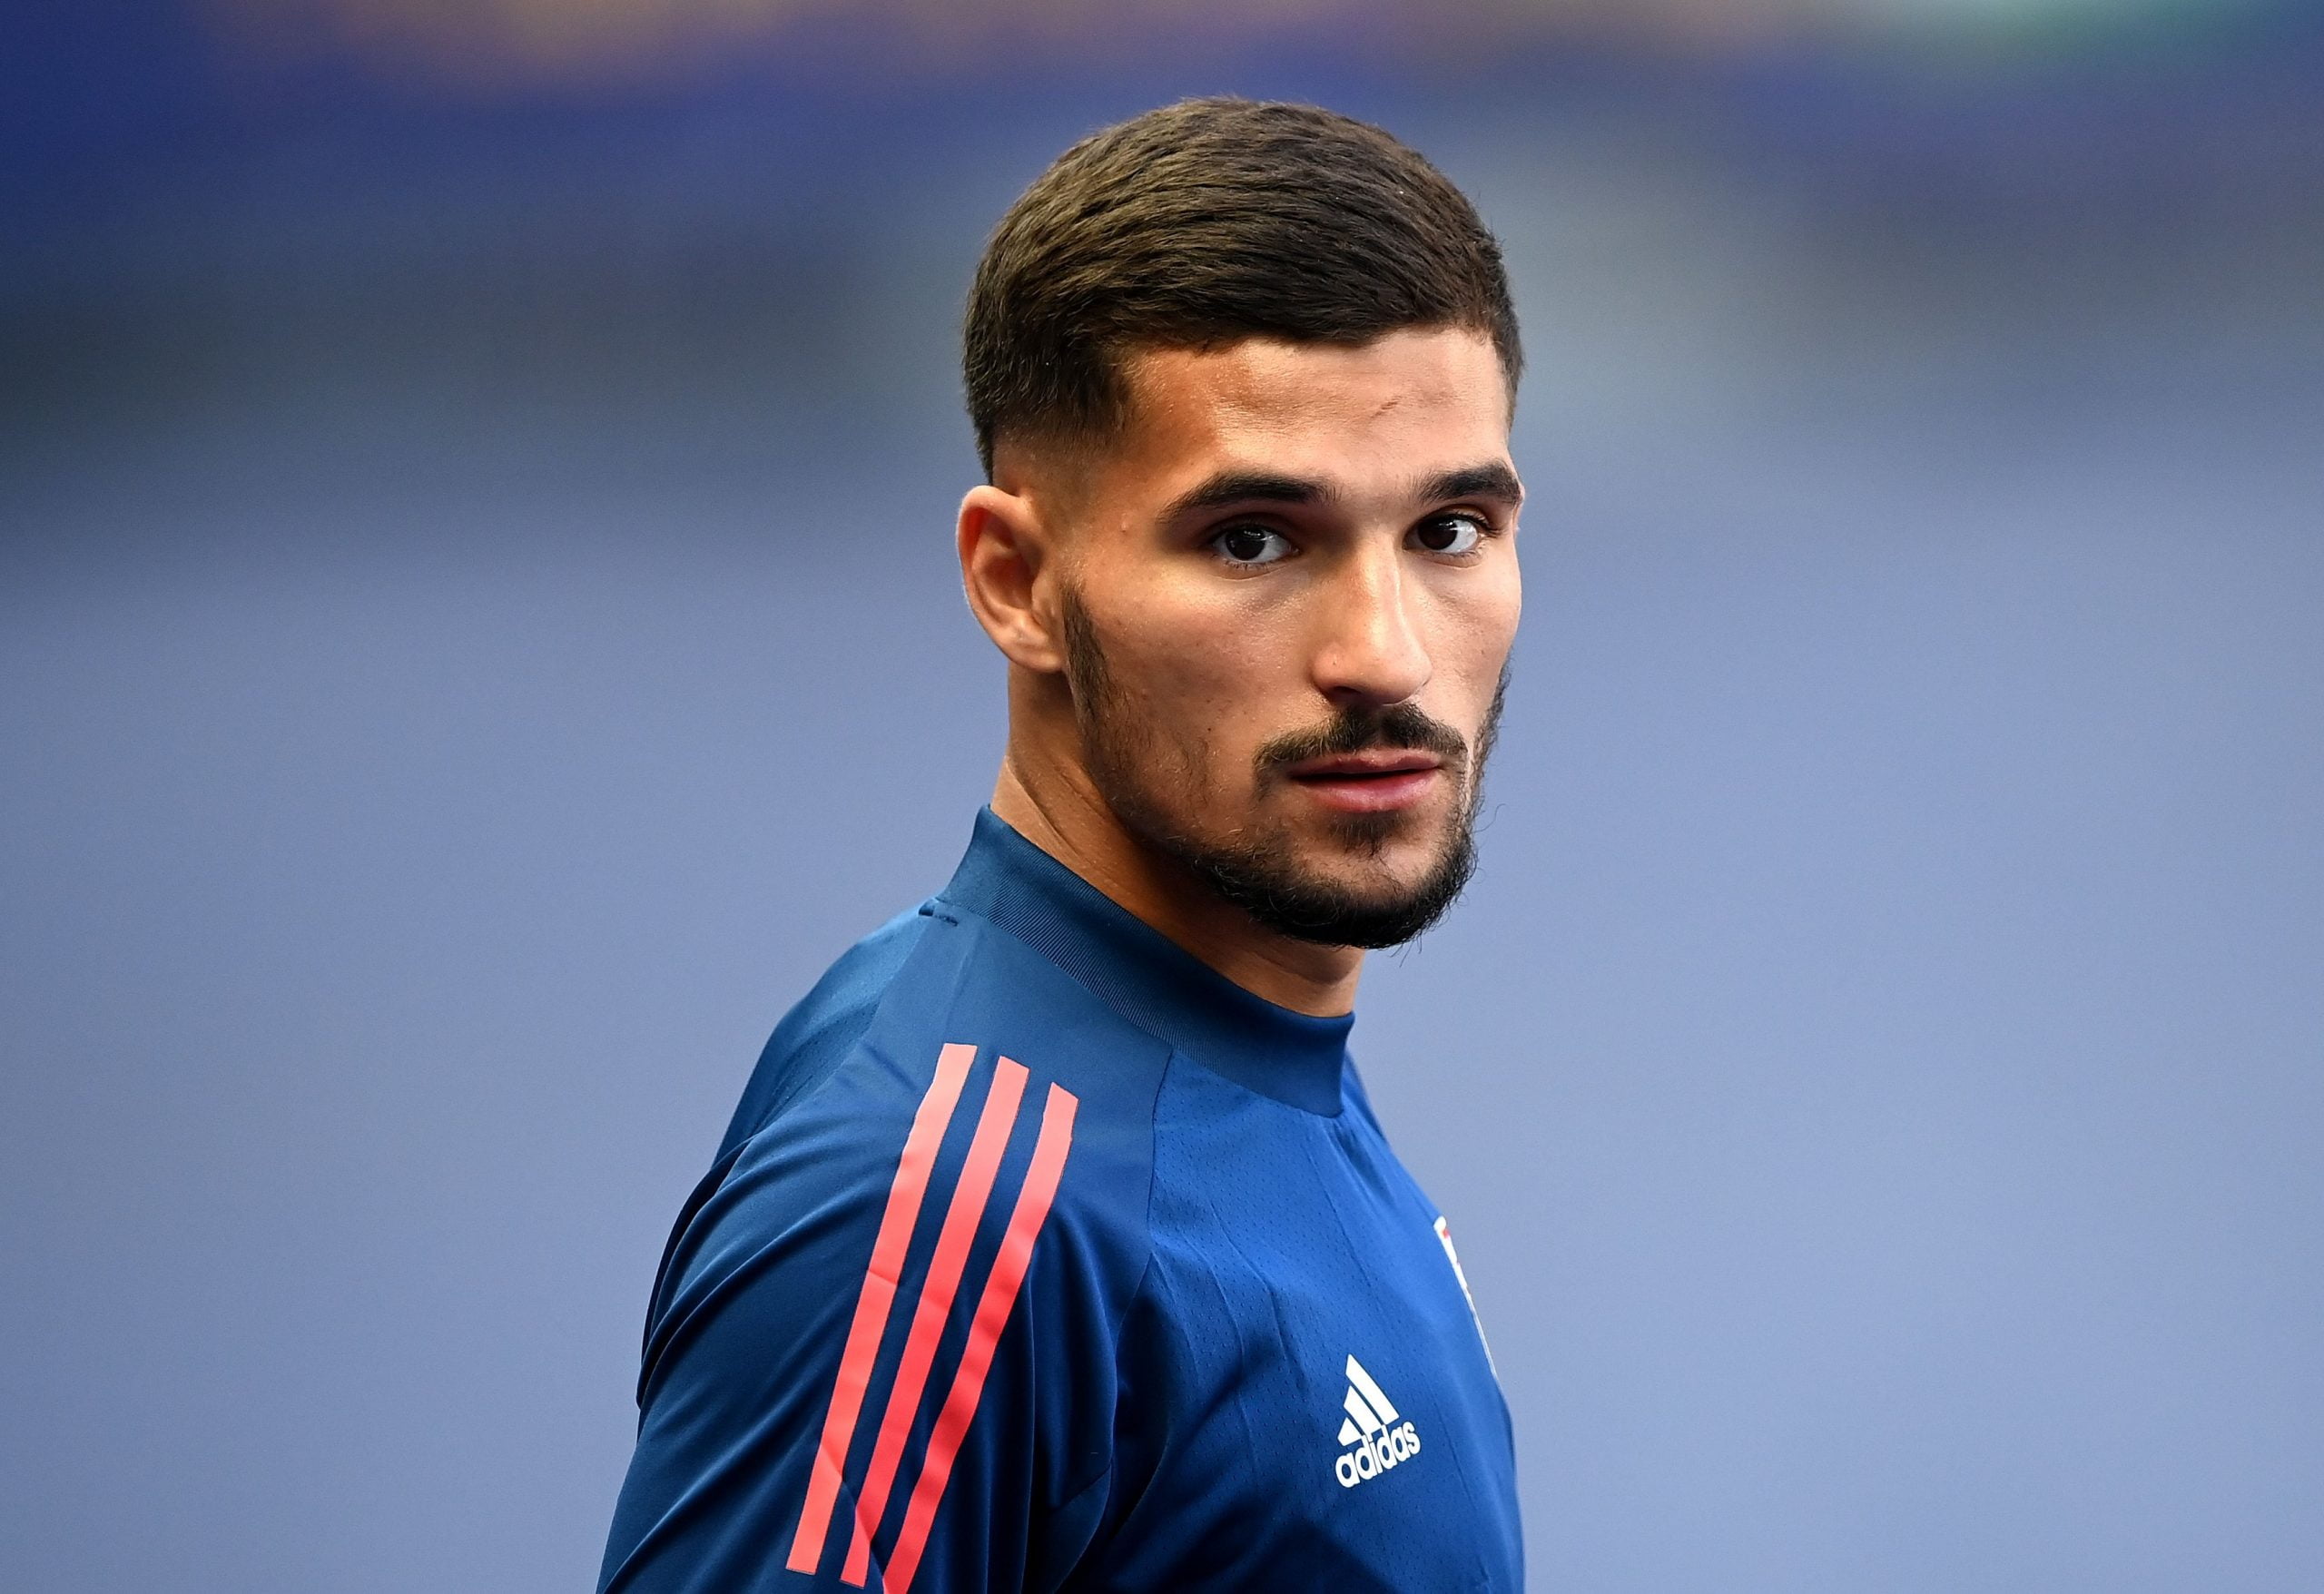 Manchester City locked in a three-way battle for Houssem Aouar who is seen in the photo